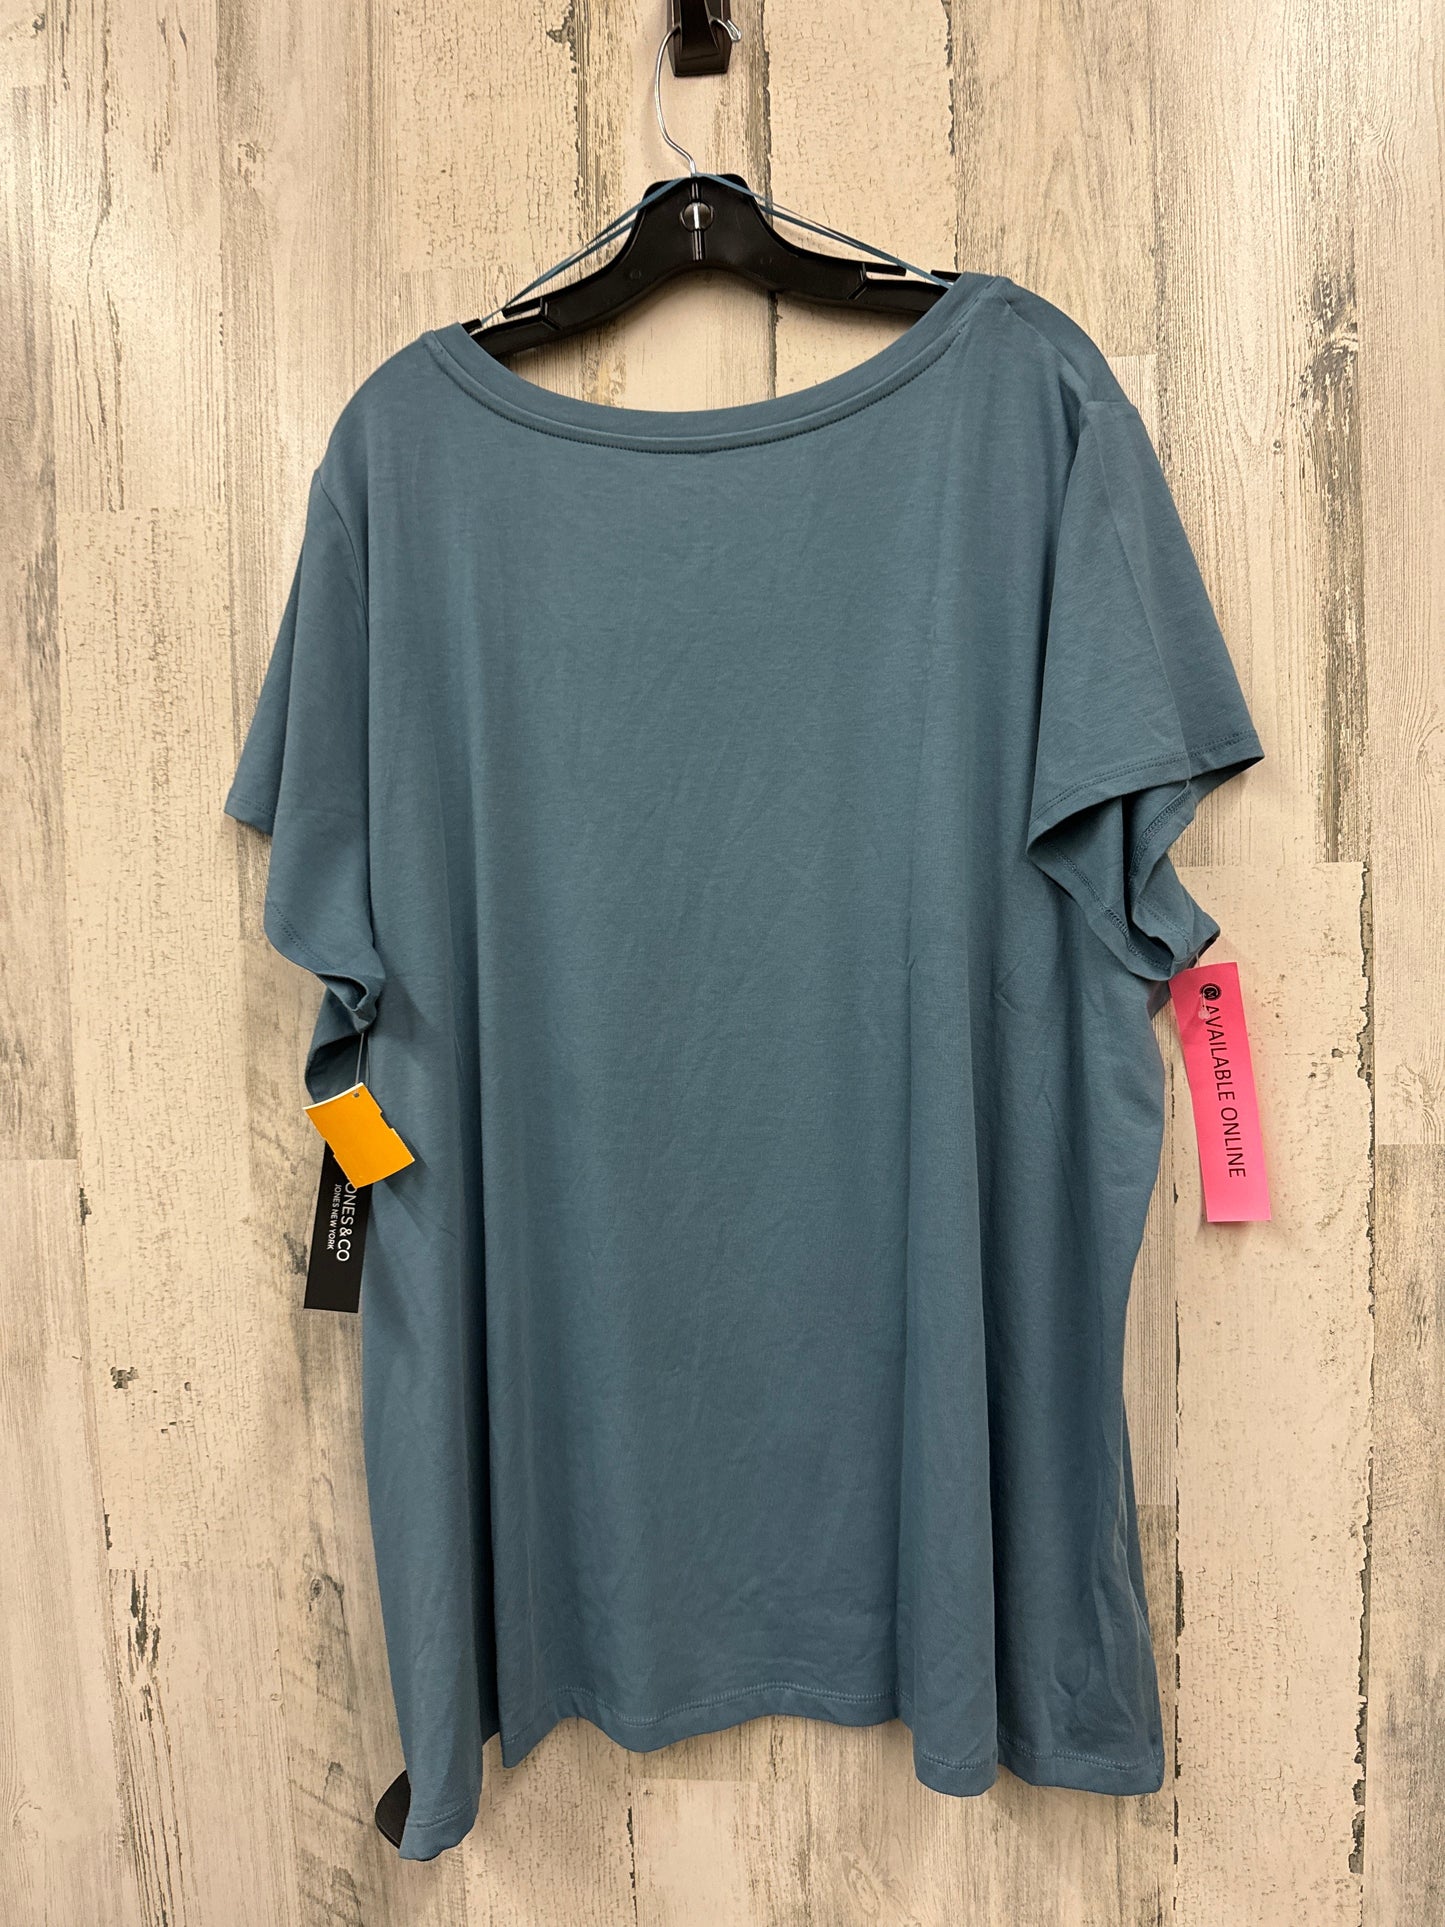 Top Short Sleeve Basic By Jones And Co  Size: 3x